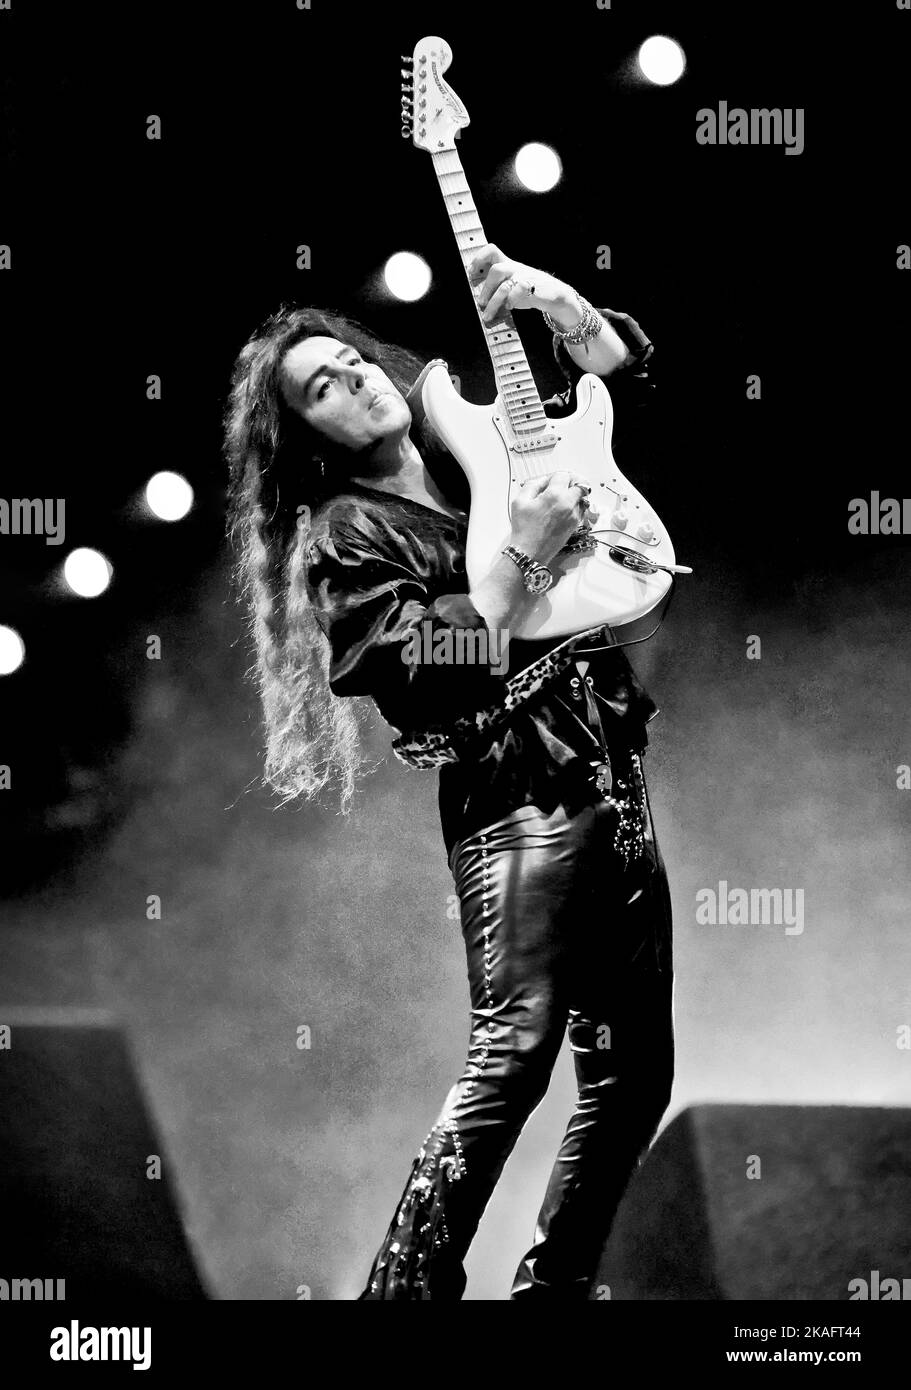 September 17, 2016, Irvine California, Yngwie Malmsteen on stage at the Sirius XM Hair Nation Fest Stock Photo